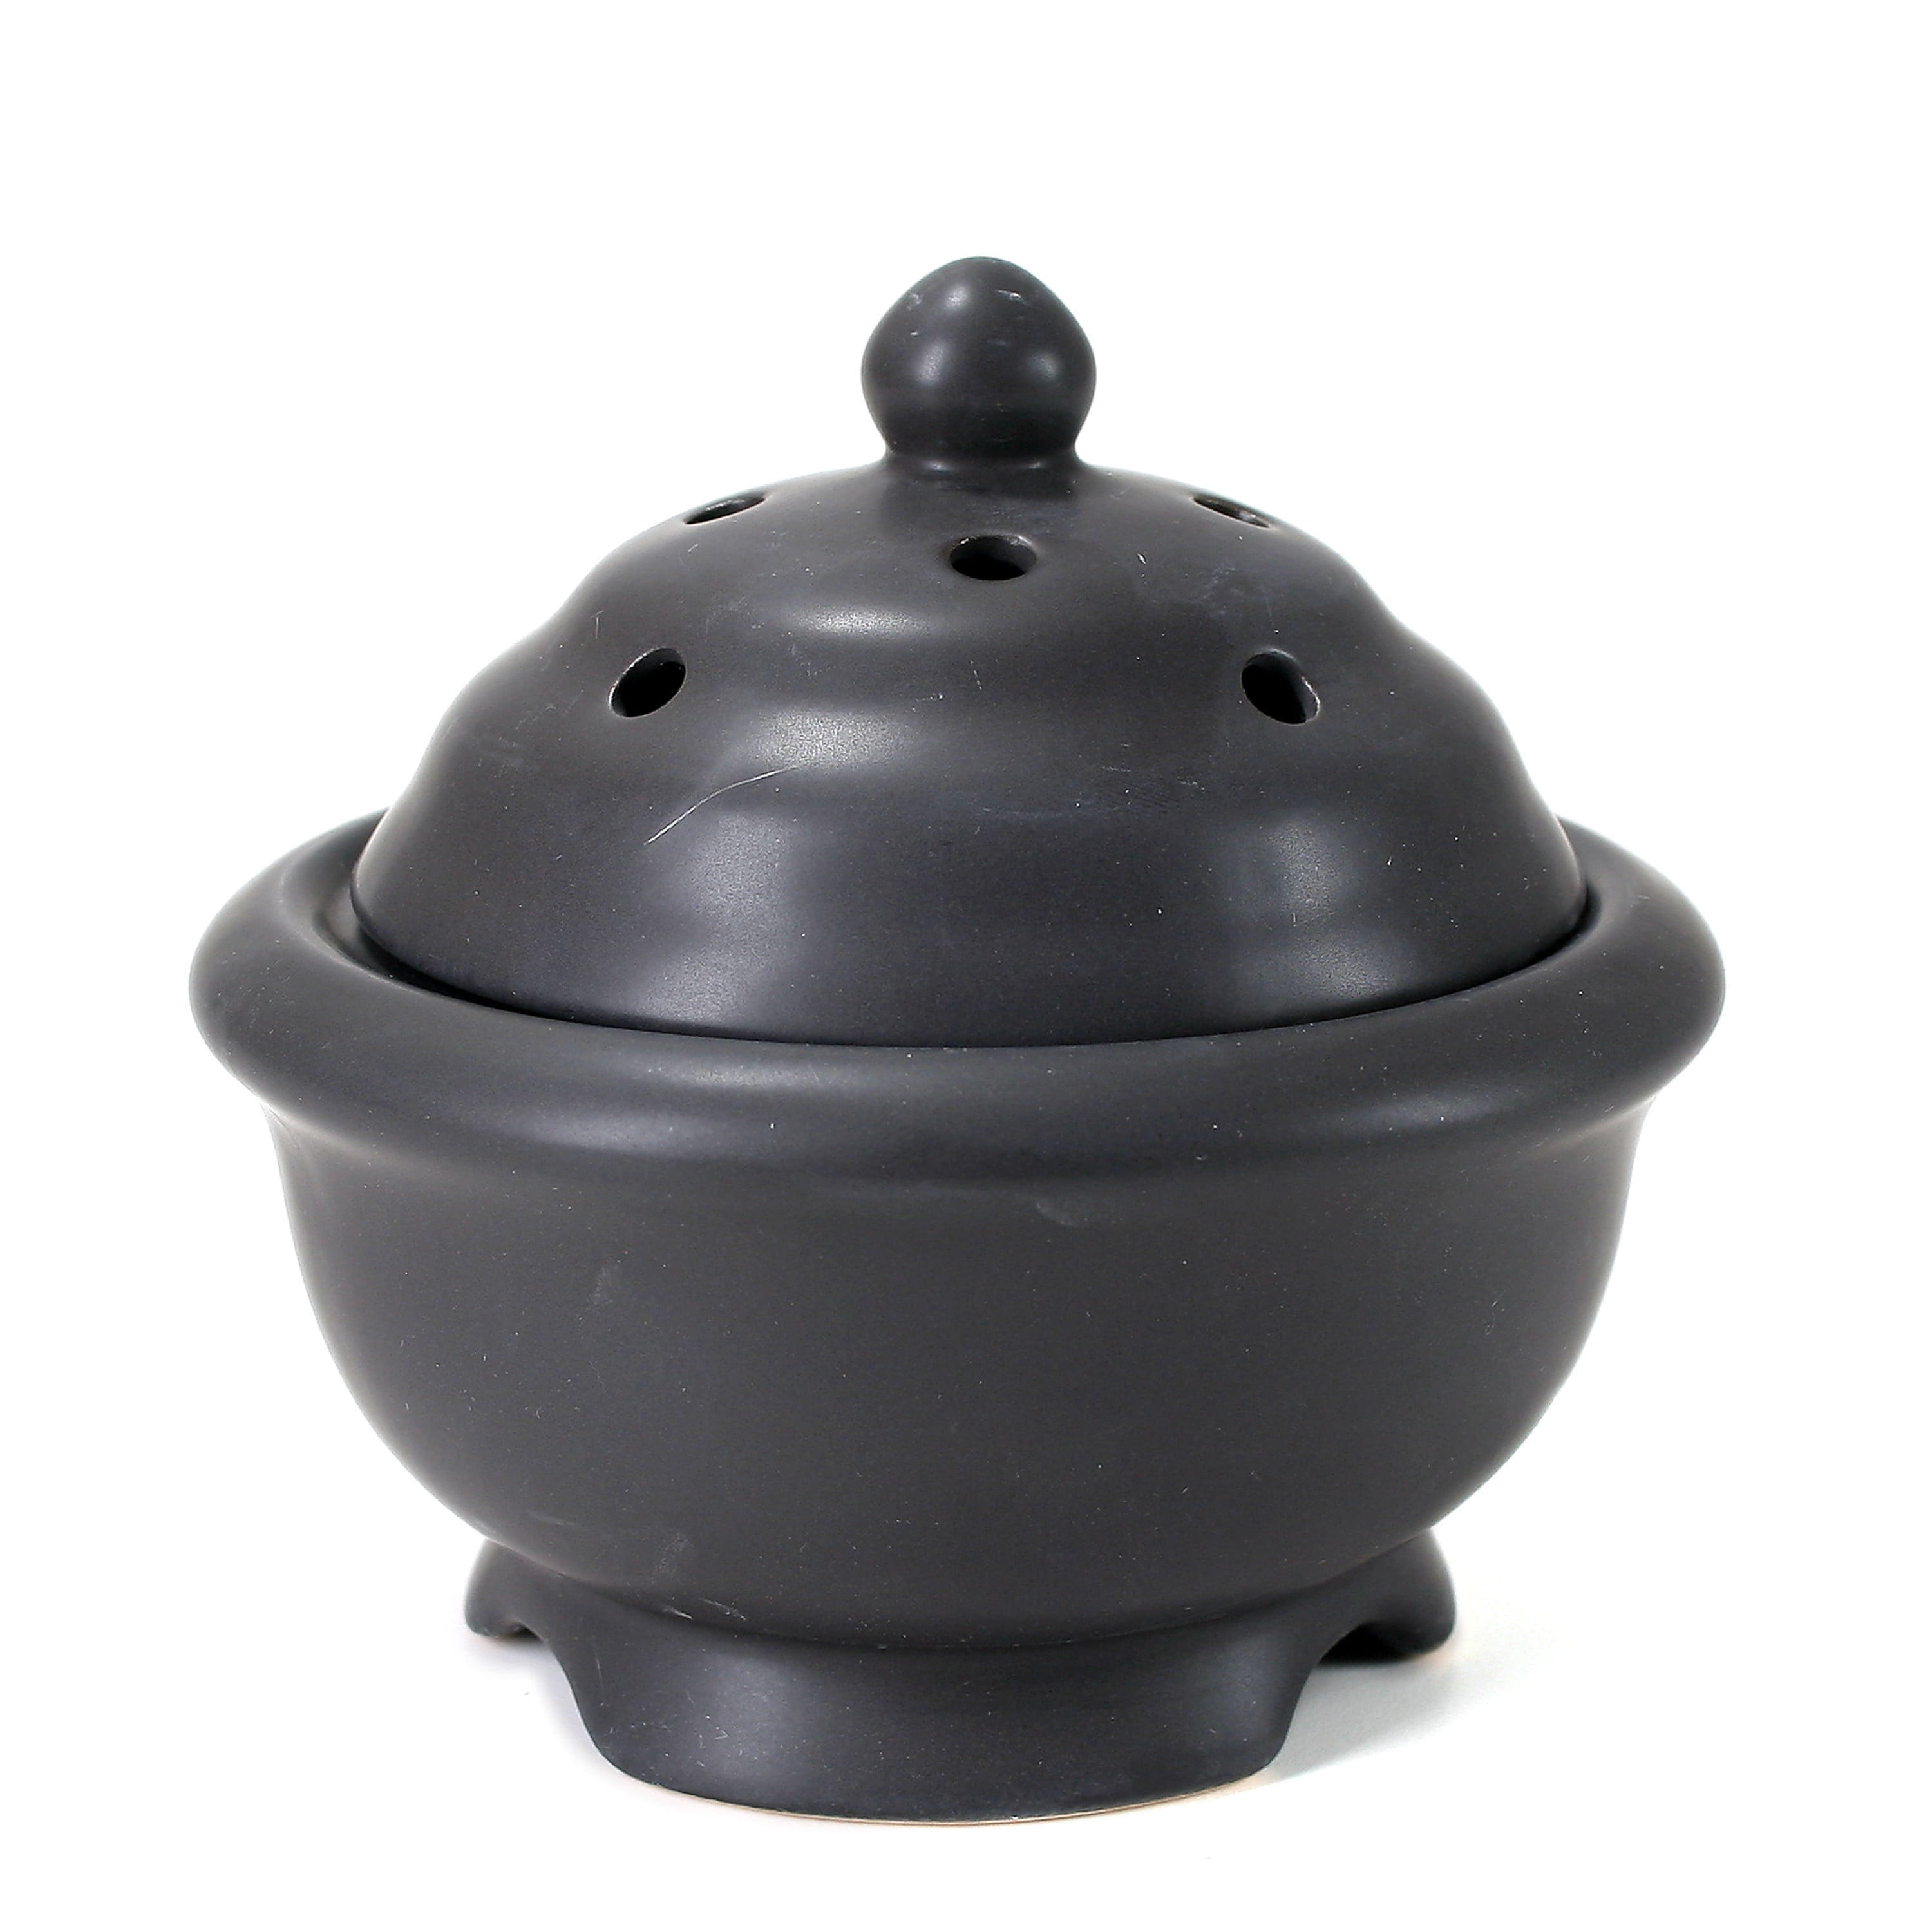 Elegant Expressions Brand Black Electric Simmering Ceramic Potpourri Warmer  - New in the box - Model # CCW-010 or #H94083WS for Sale in Great Mills, MD  - OfferUp